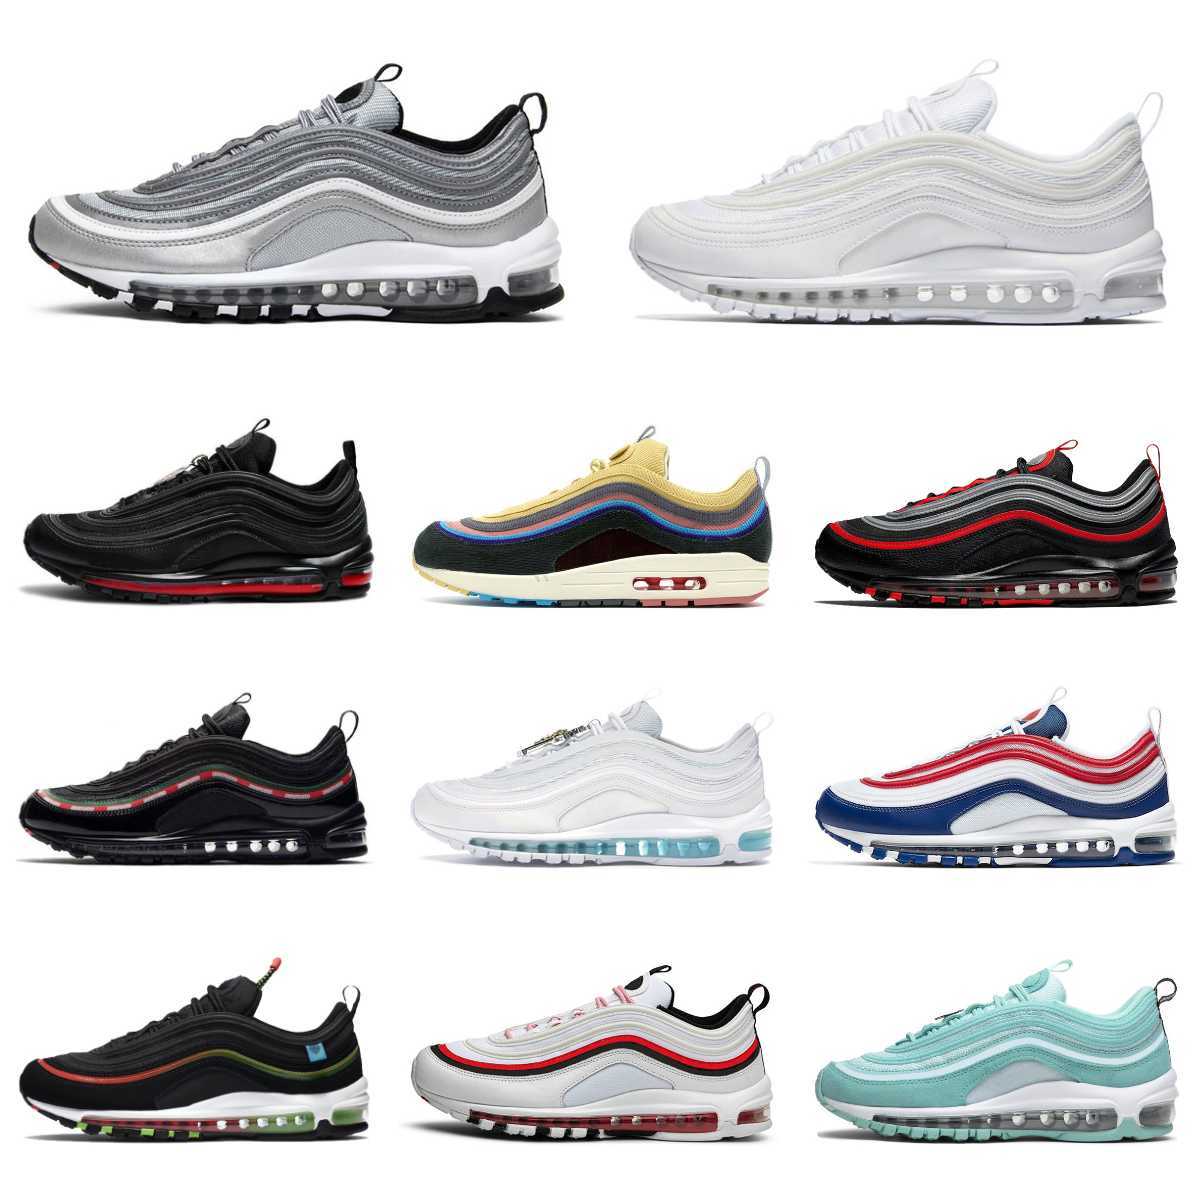 

Train Max 97 Mens Casual Shoes Air 97s Sean Wotherspoon Sliver Bullet MSCHF X INRI Jesus Undefeated Black Summit Triple White Metalic Gold Women Designer Sneakers S1, Please contact us